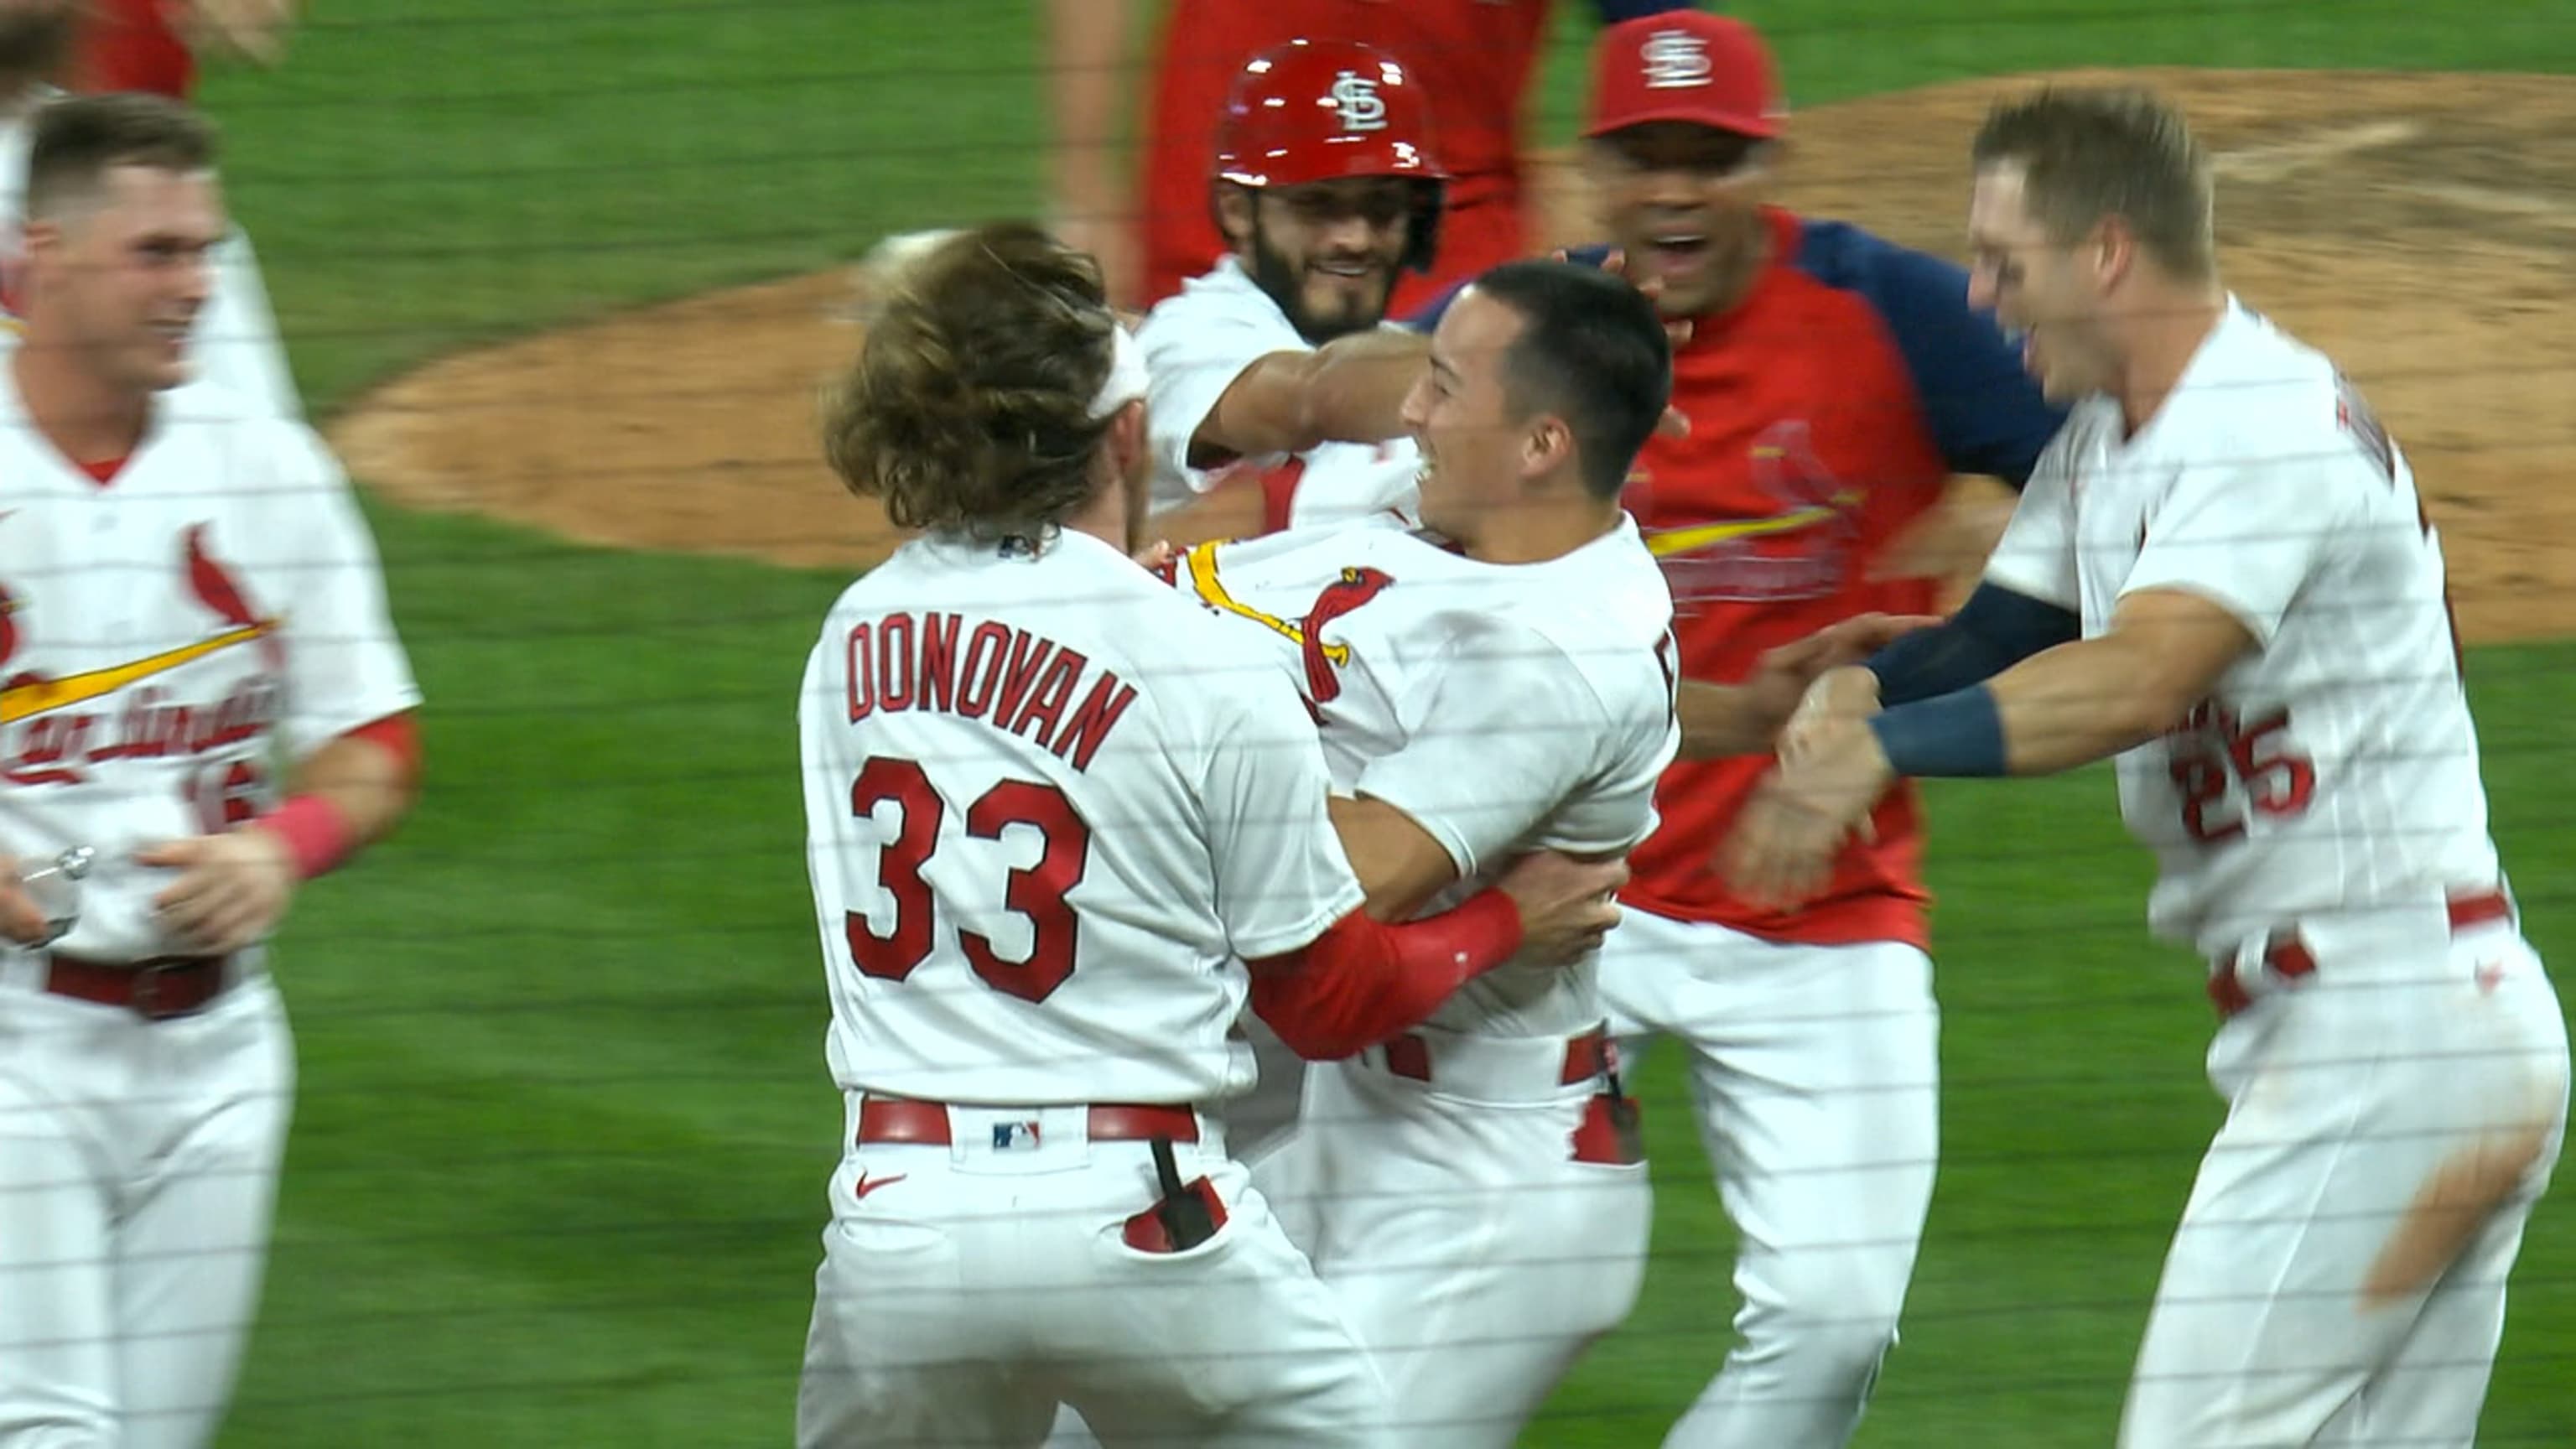 Edman's 2nd straight walk-off hit off Hader gives Cardinals 5-4 win - ABC30  Fresno